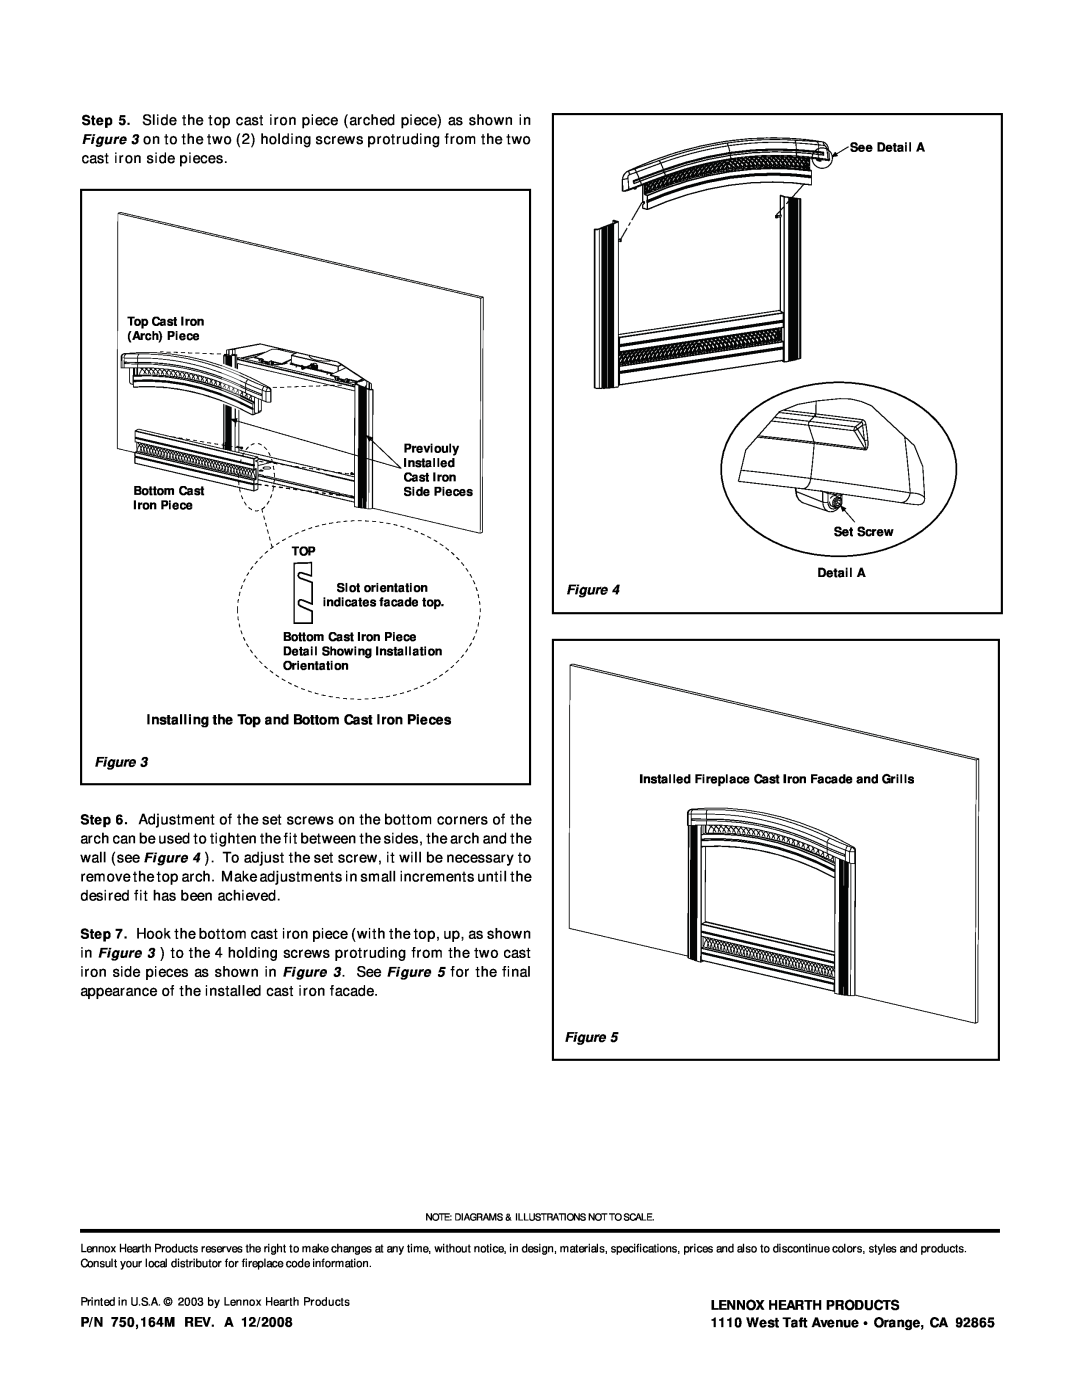 Lennox Hearth LSSCA40, LSS-CA35 installation instructions Lennox Hearth Products, P/N 750,164M REV. A 12/2008 